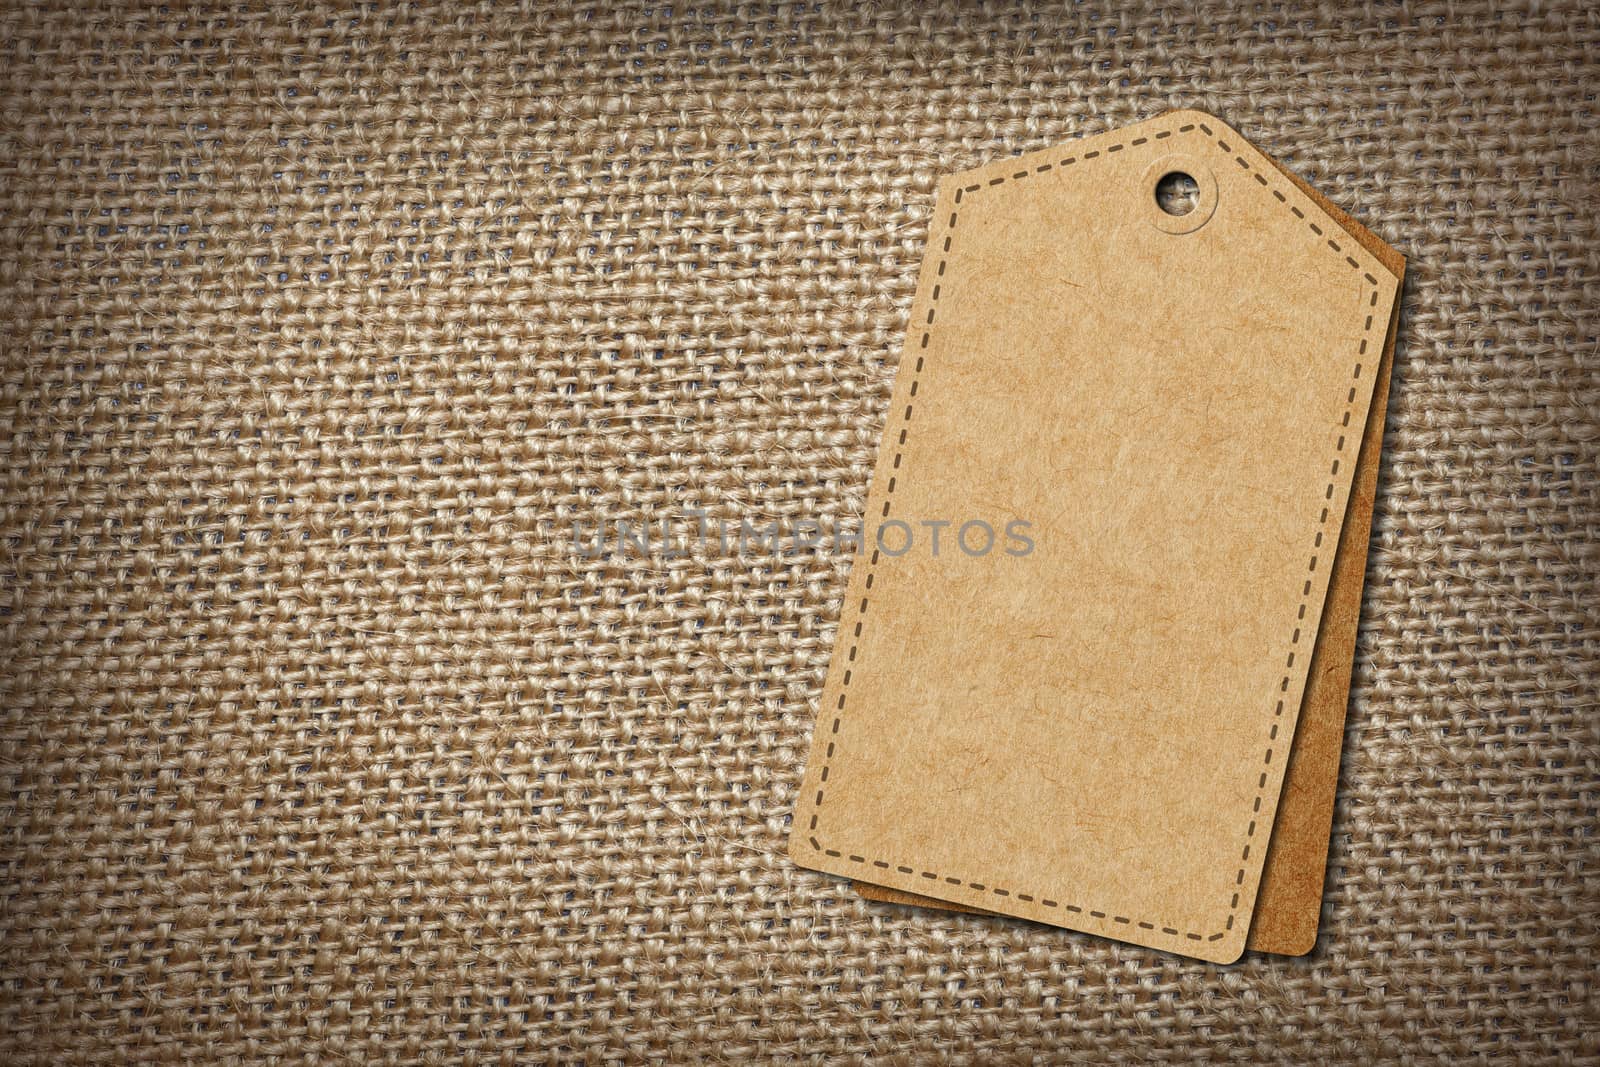 background of burlap hessian sacking with blank paper tag